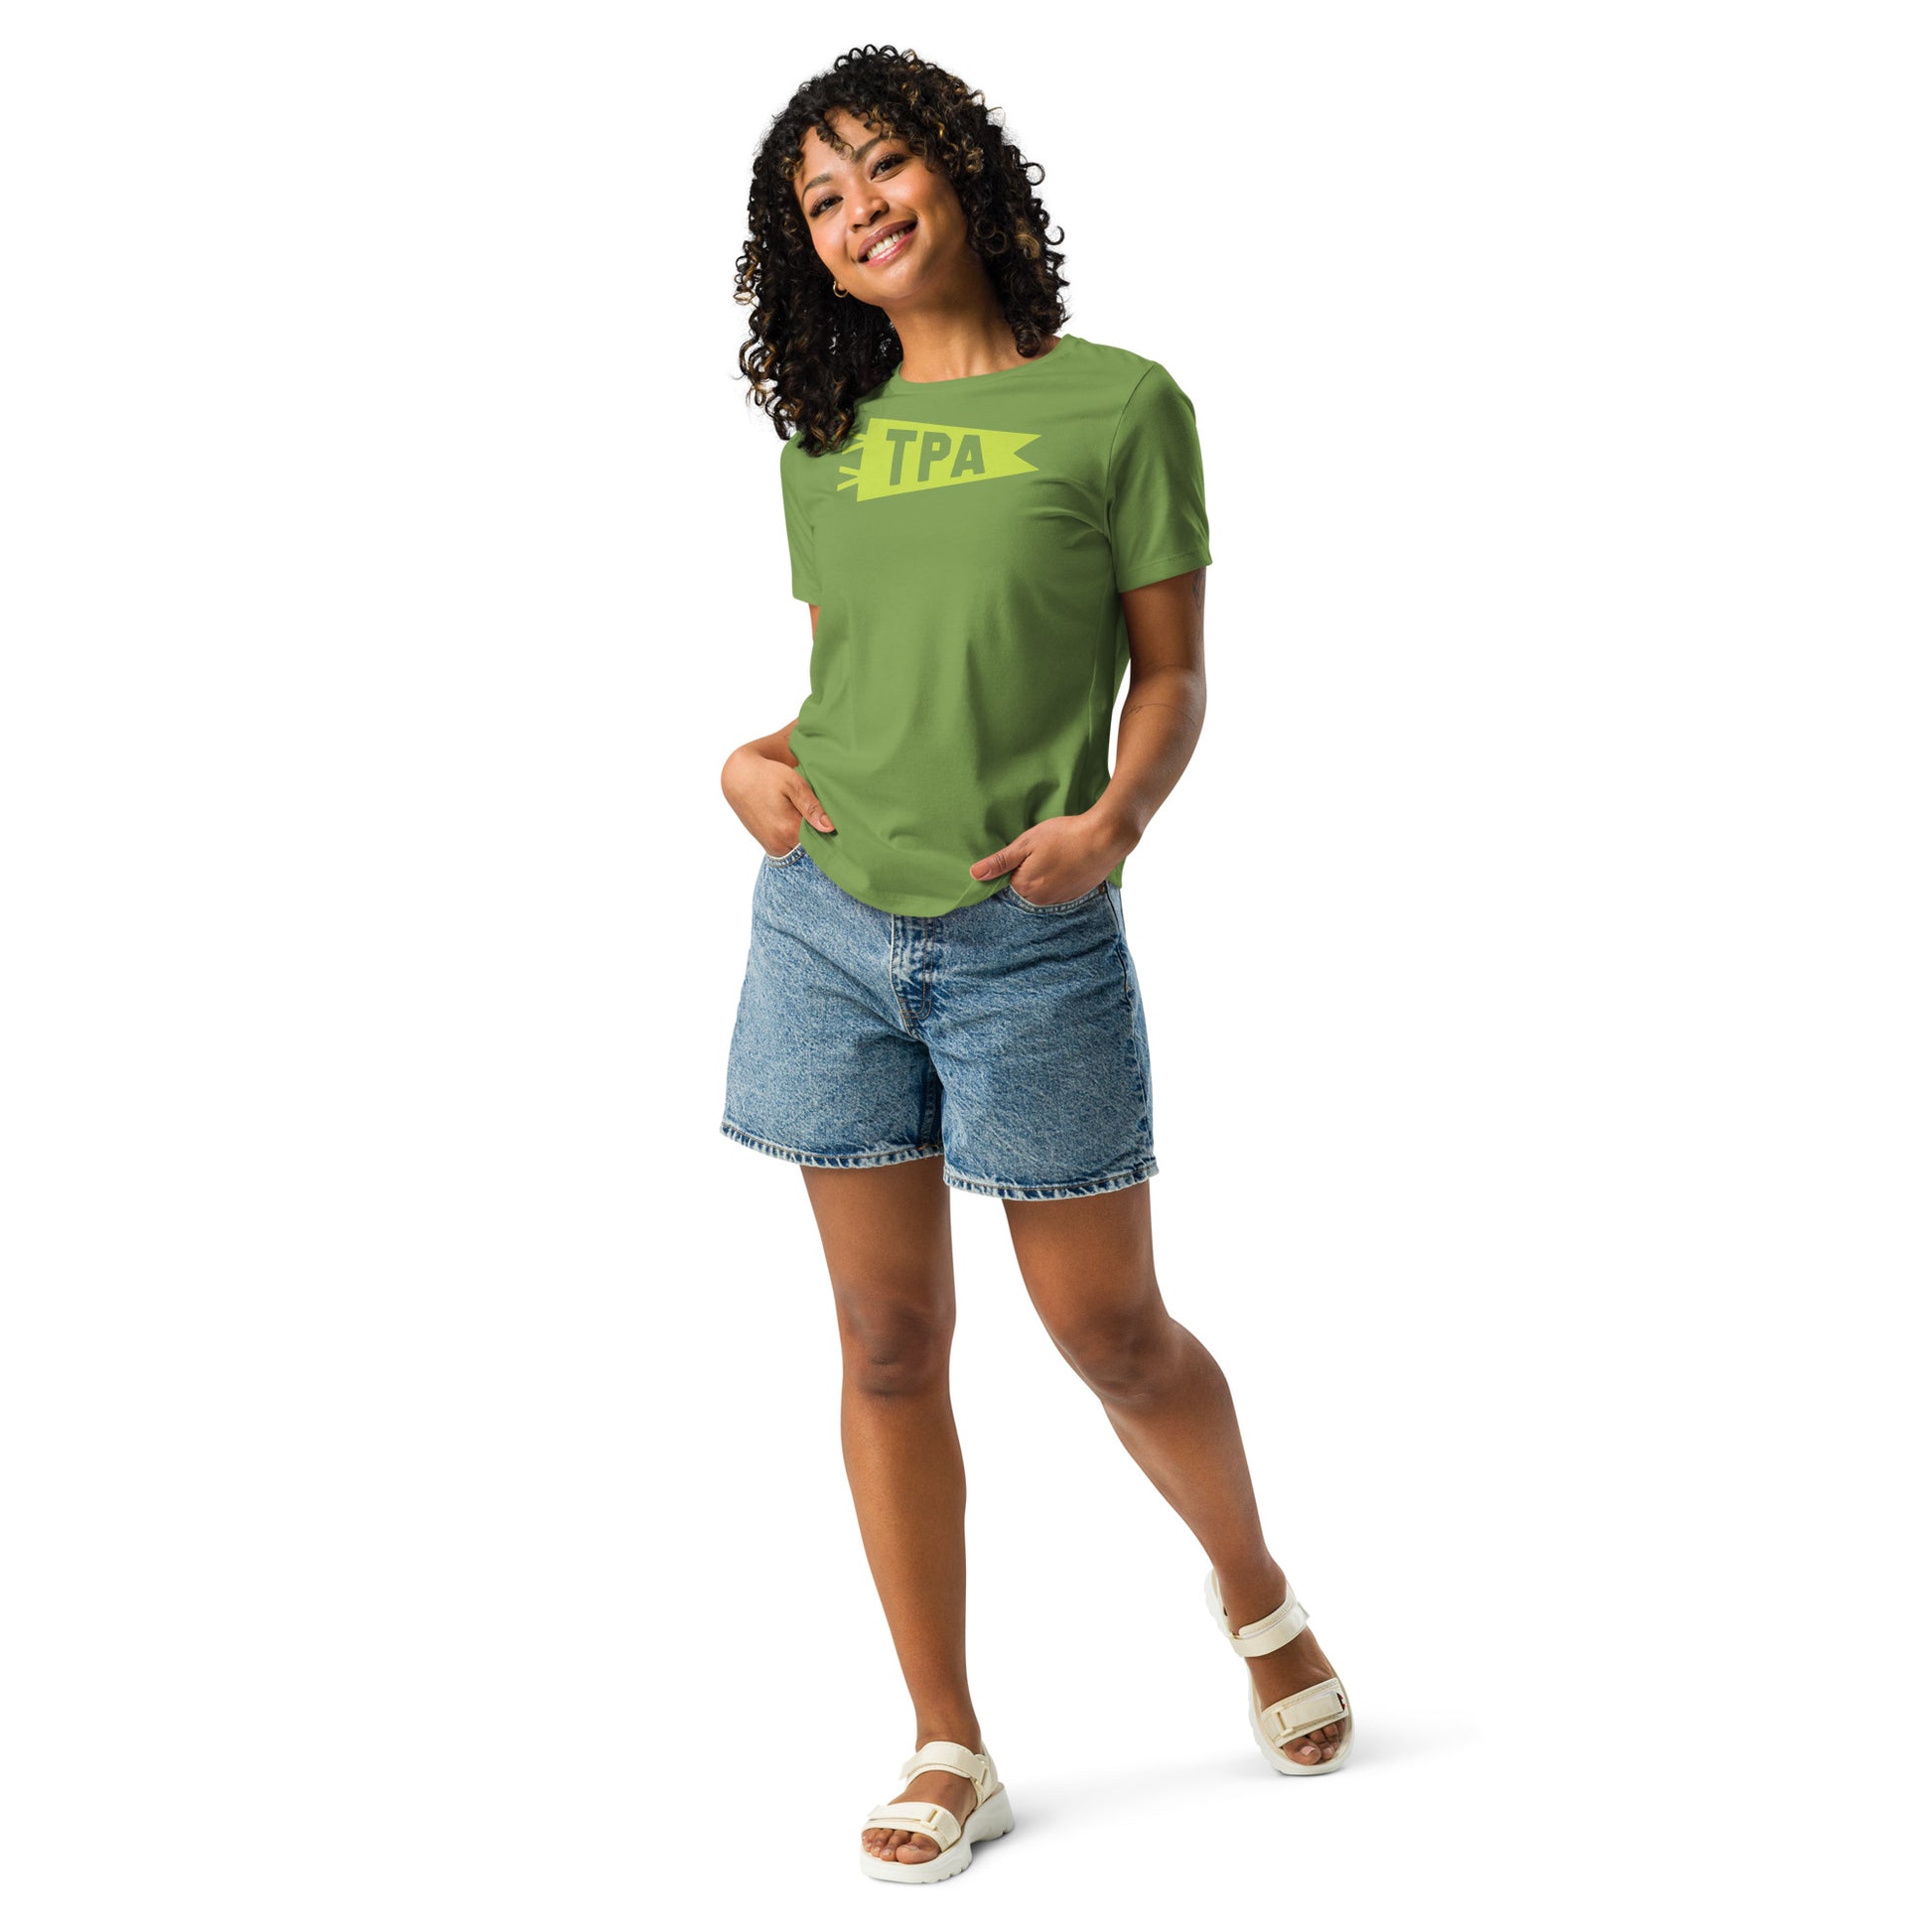 Airport Code Women's Tee - Green Graphic • TPA Tampa • YHM Designs - Image 08